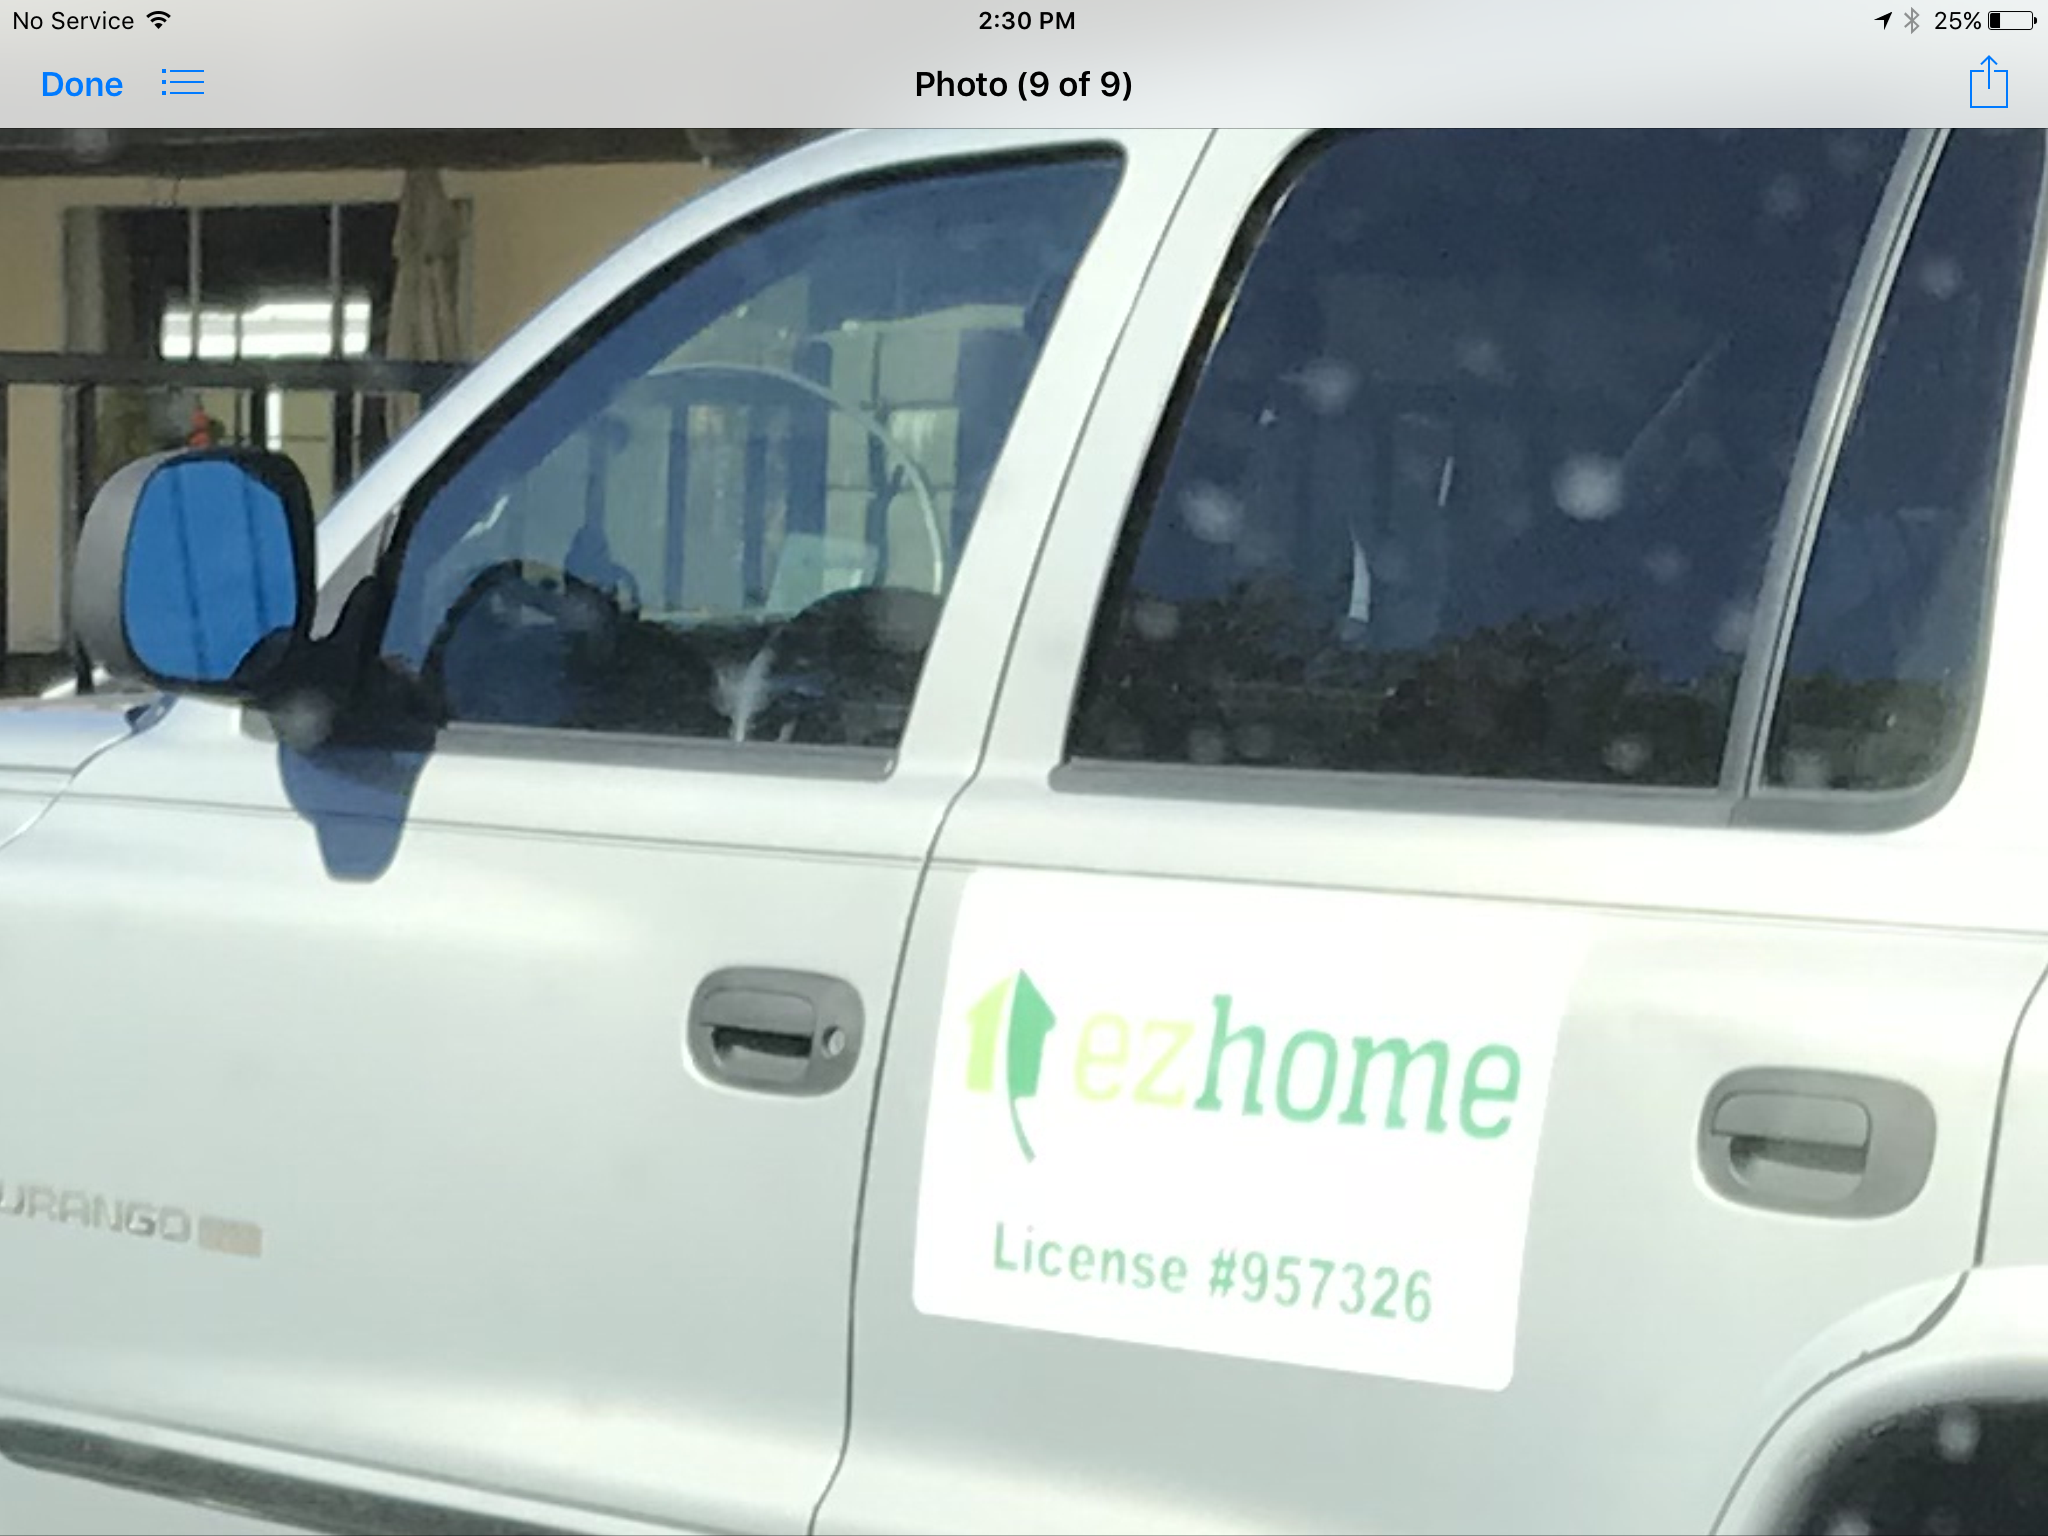 Tony Dangs vehicle with sign for ezhome 